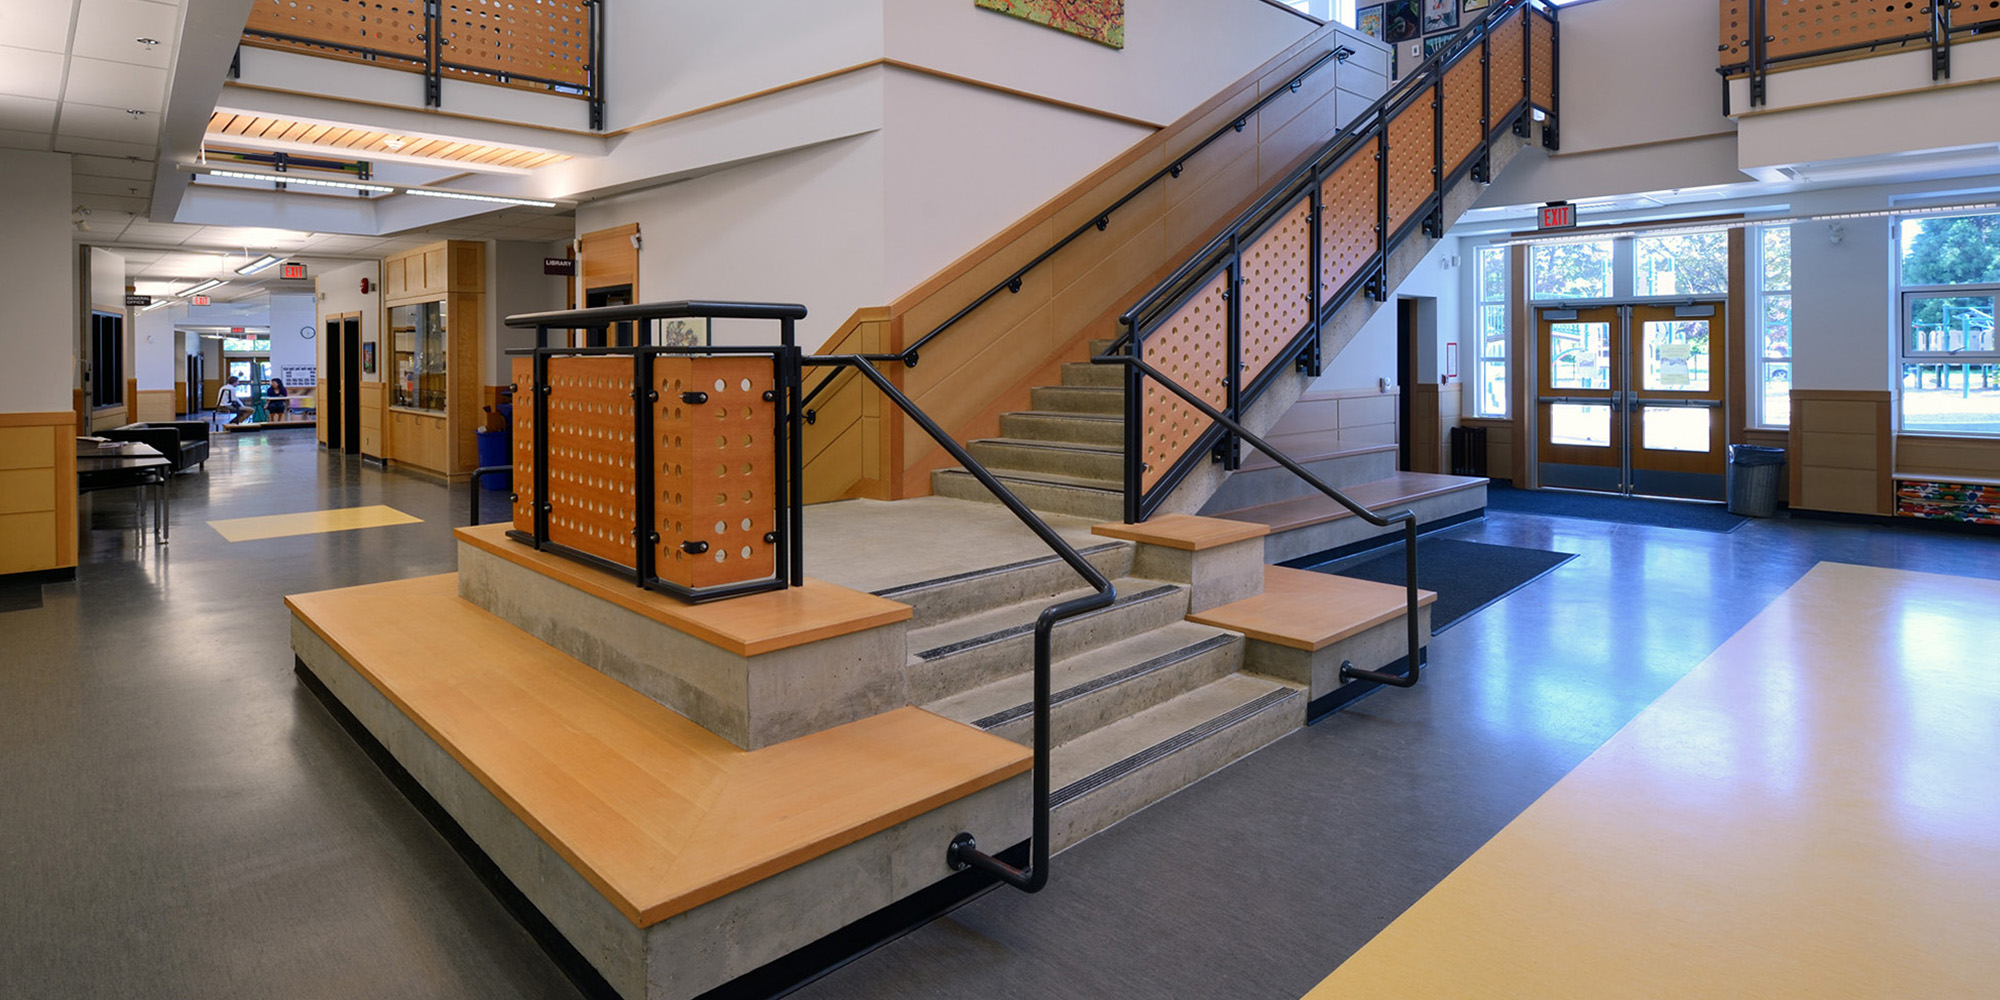 Staircase inside Lord Kitchener Elementary School in Vancouver